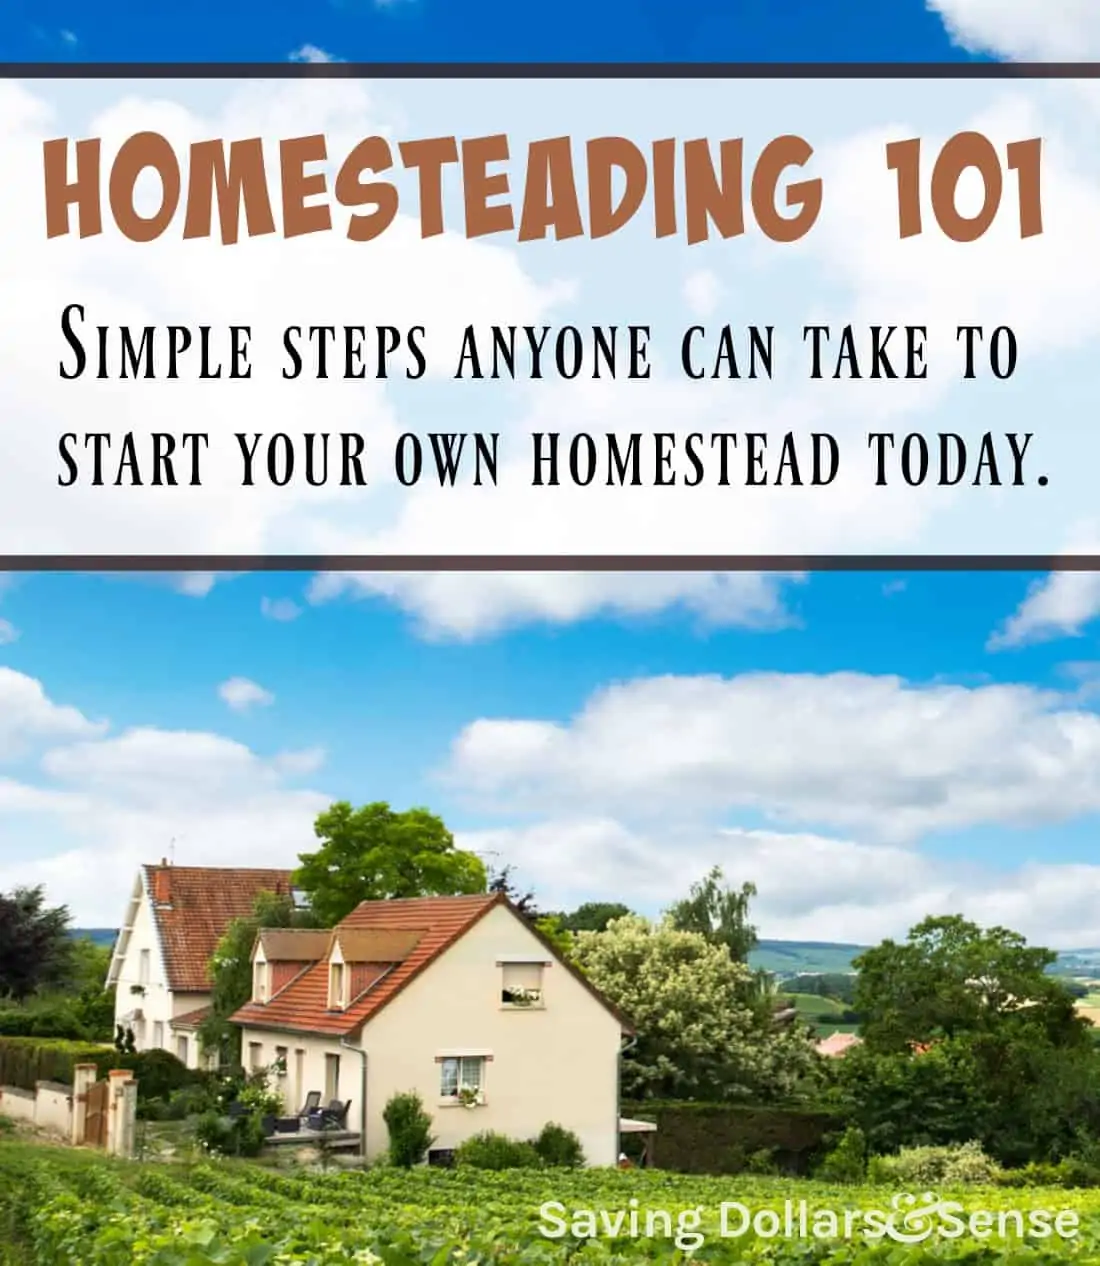 How to Begin Homesteading Without a Farm